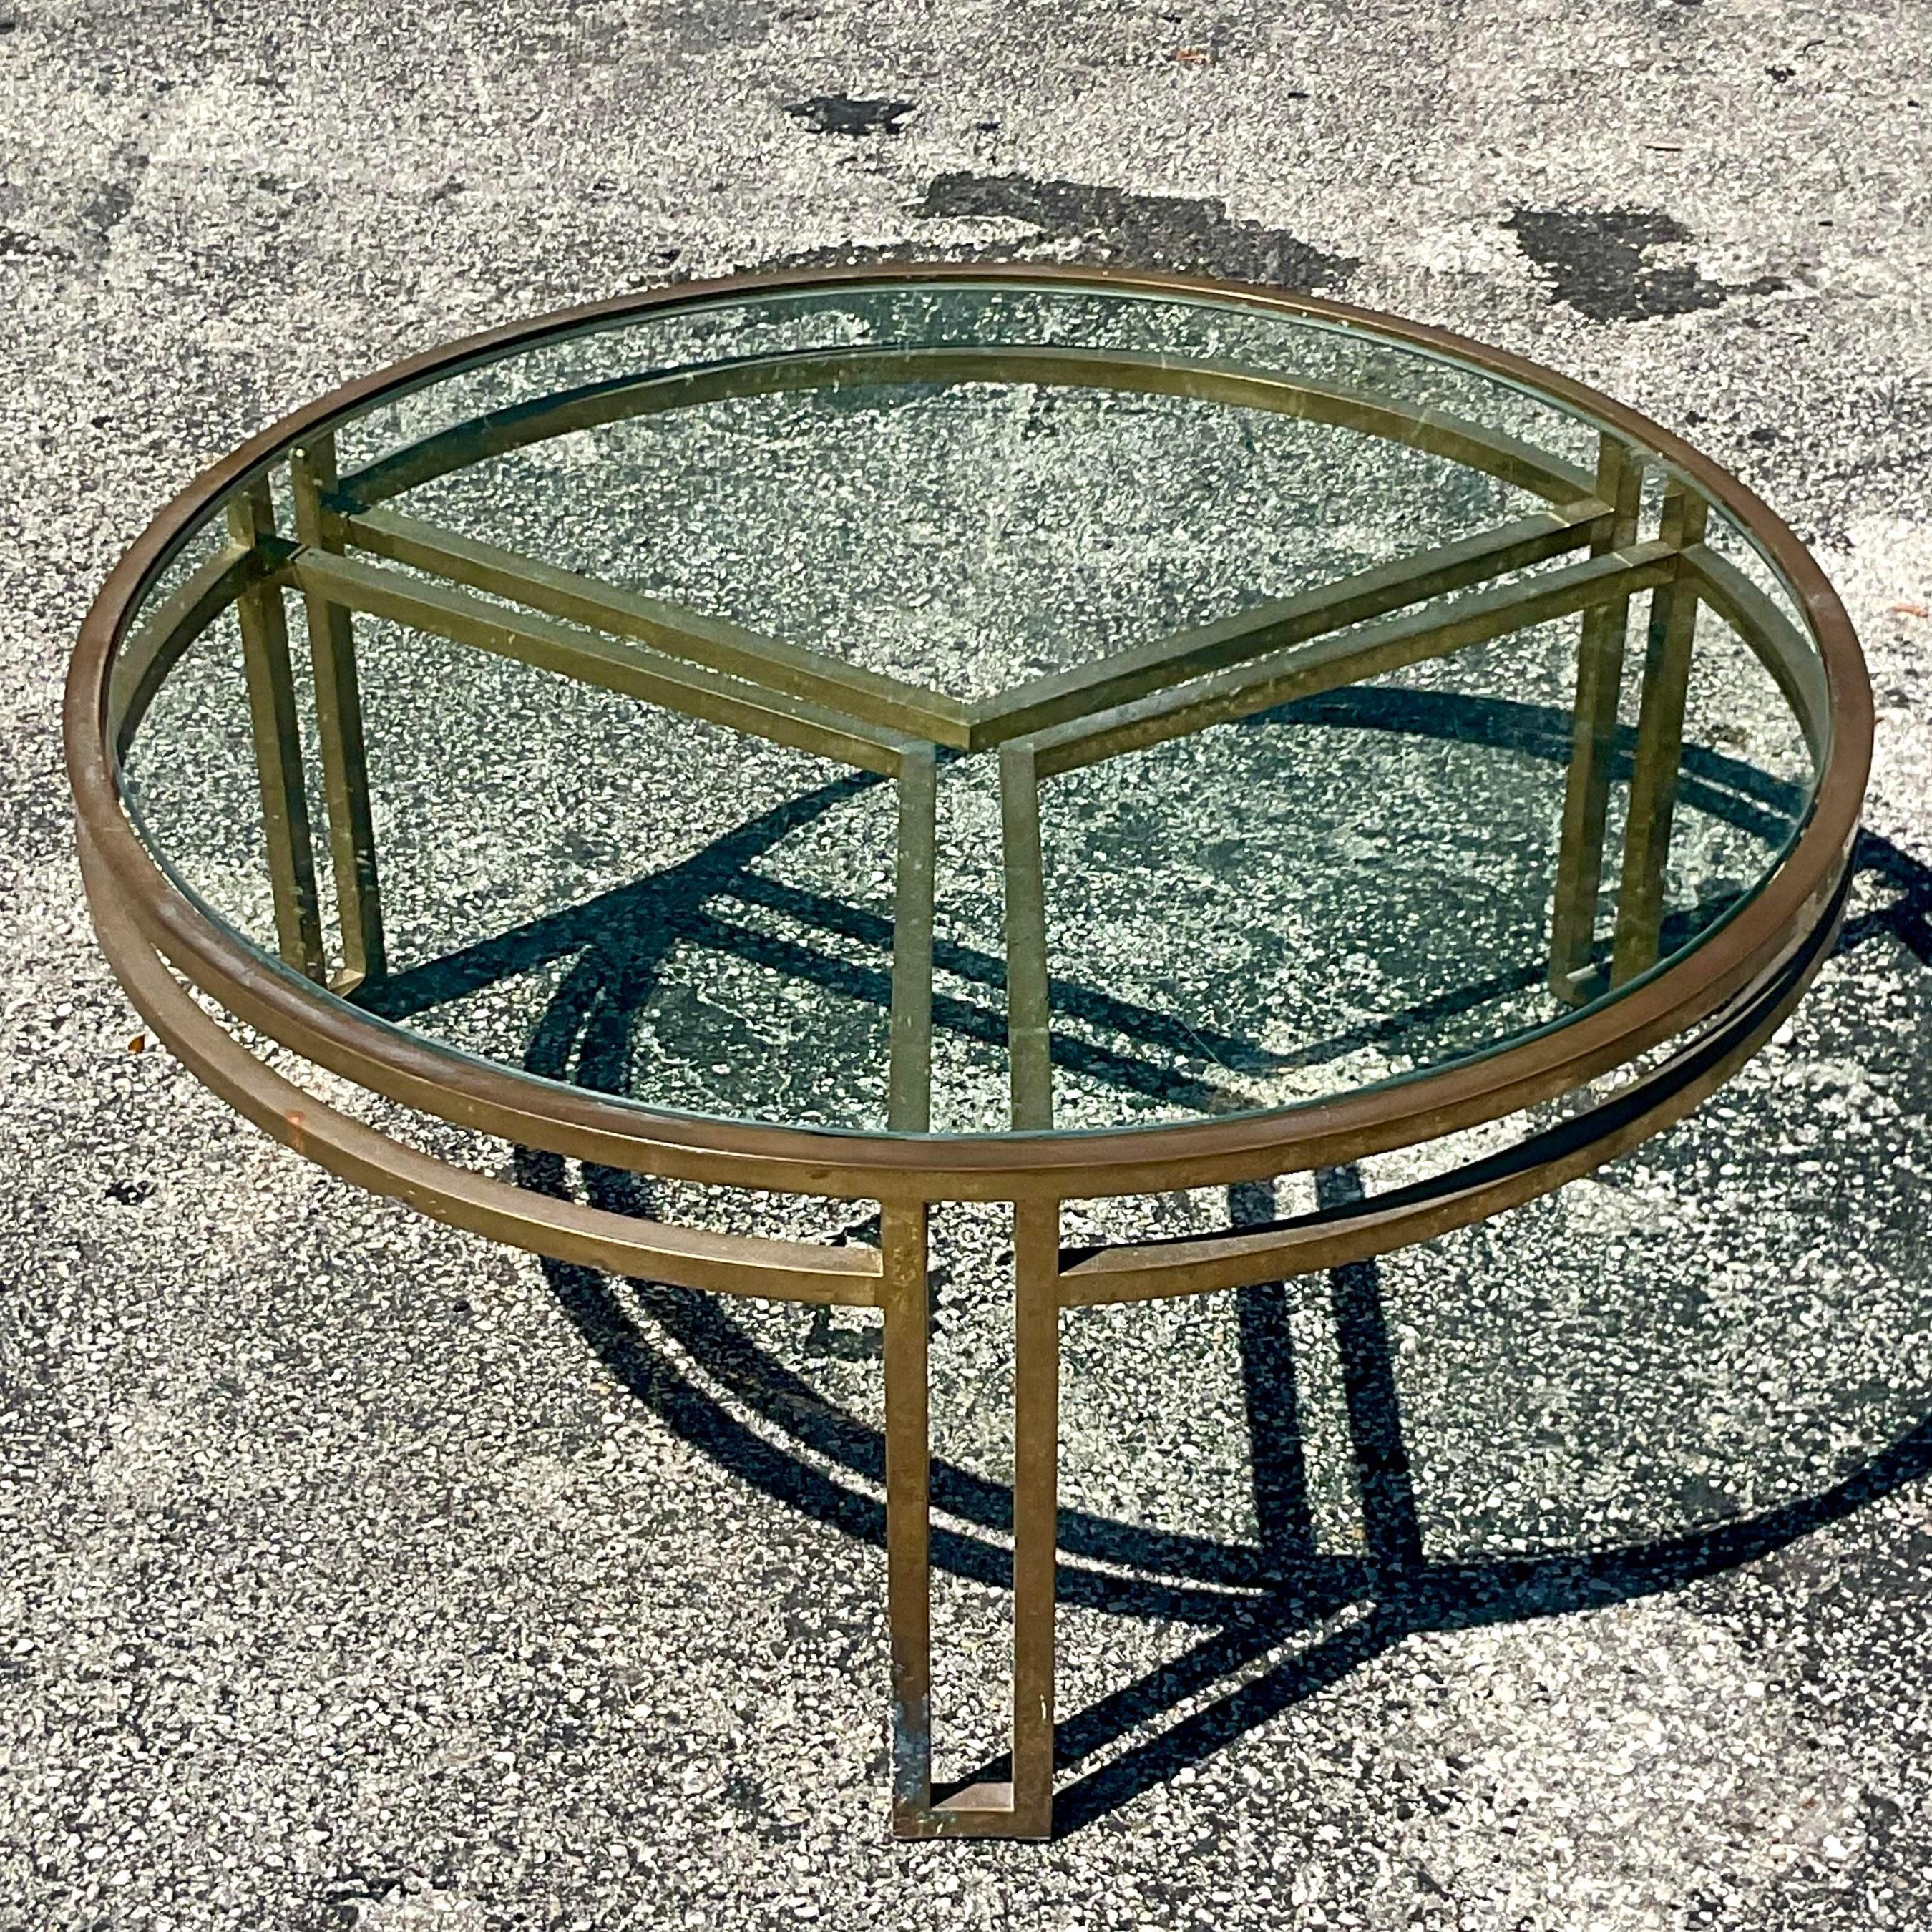 A fabulous vintage Coffee table. A chic Contemporary design in brass with an inset glass top. Acquired from a Palm Beach estate.